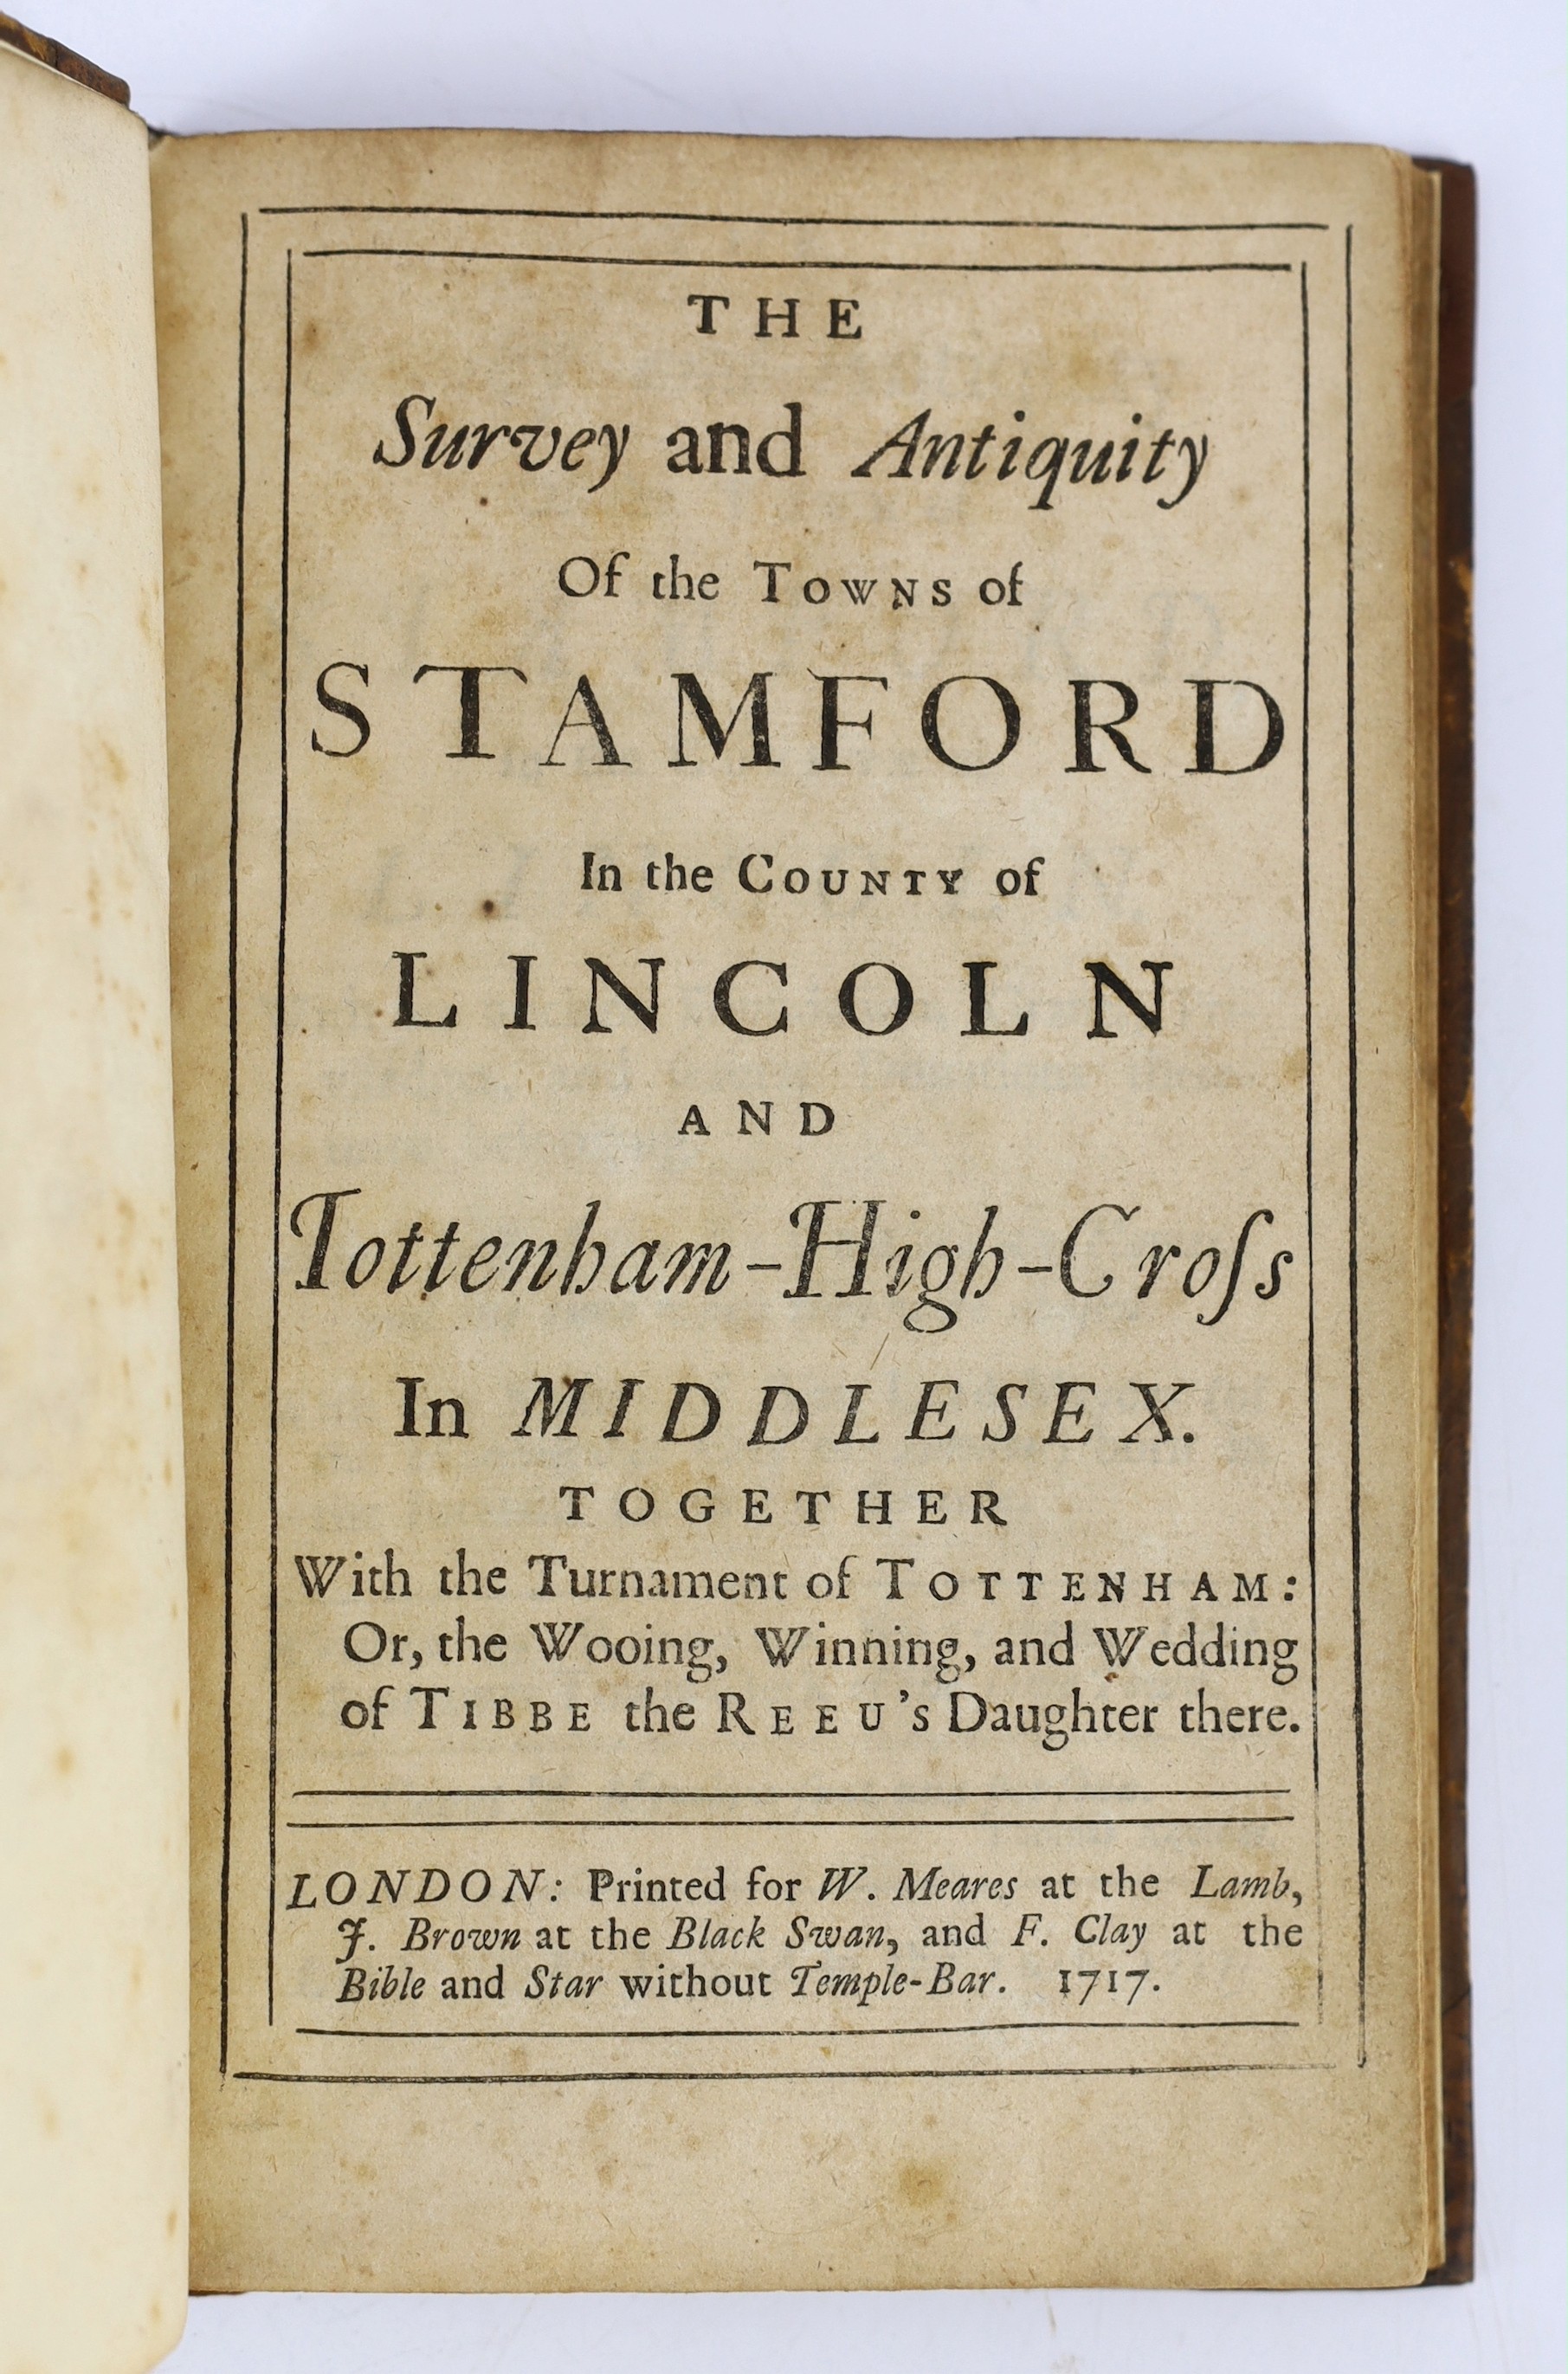 LINCS: Blore, Thomas - An Account of the Public Schools, Hospitals, and other Charitable Foundations, in the Borough of Stanford (sic) ... frontis and text engravings; old half calf and marbled boards, gilt-decorated and